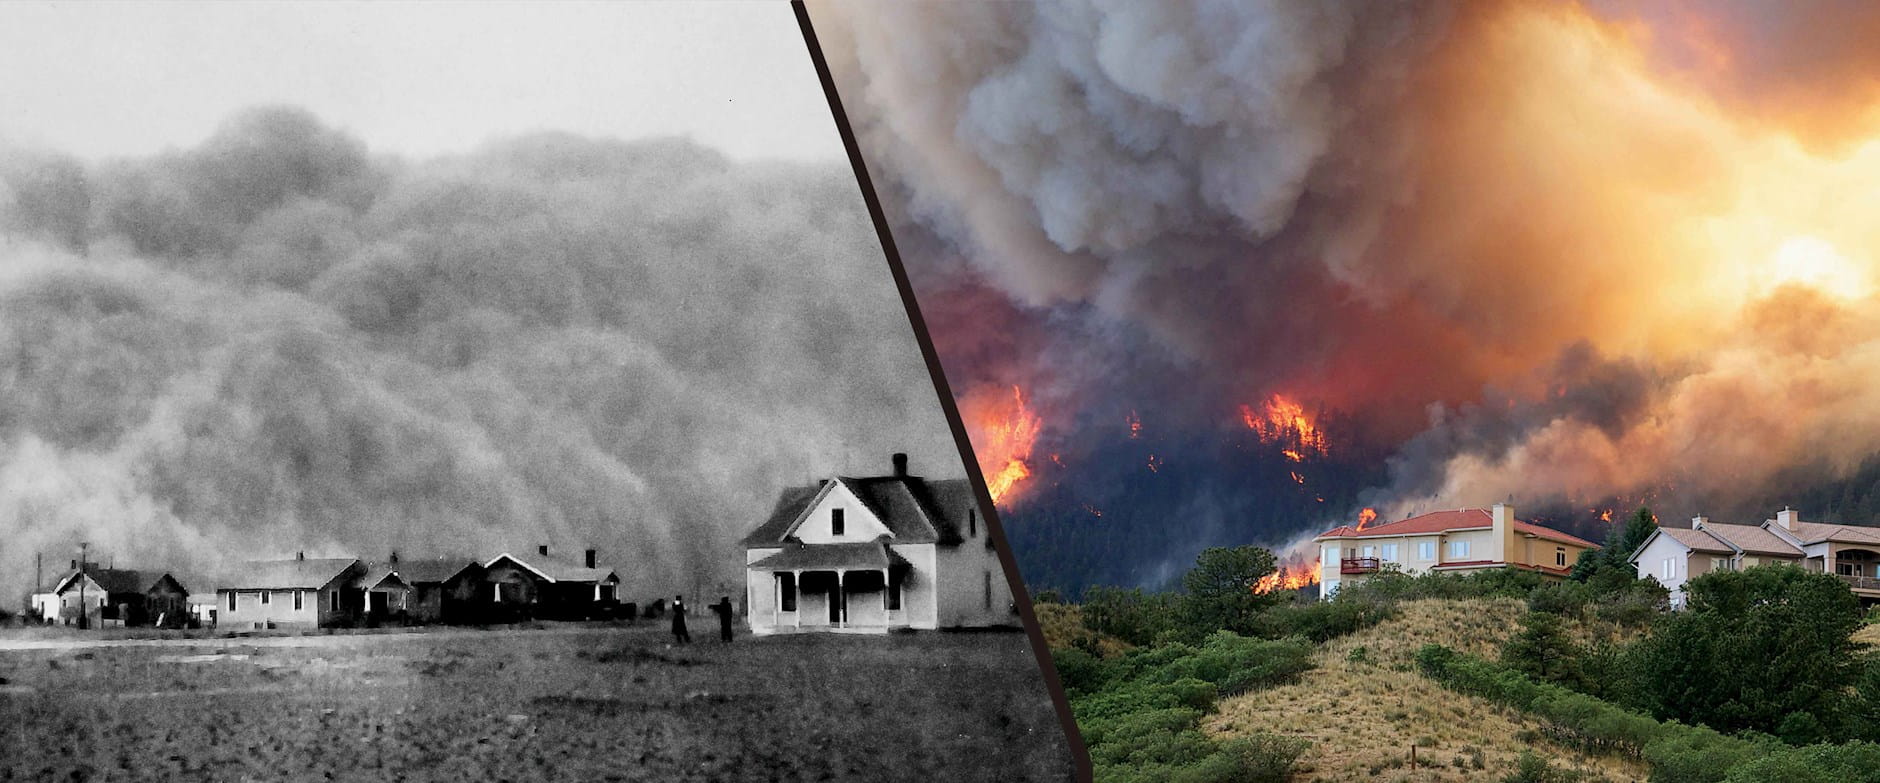 Dust Bowl farm and modern homes threatened by fire